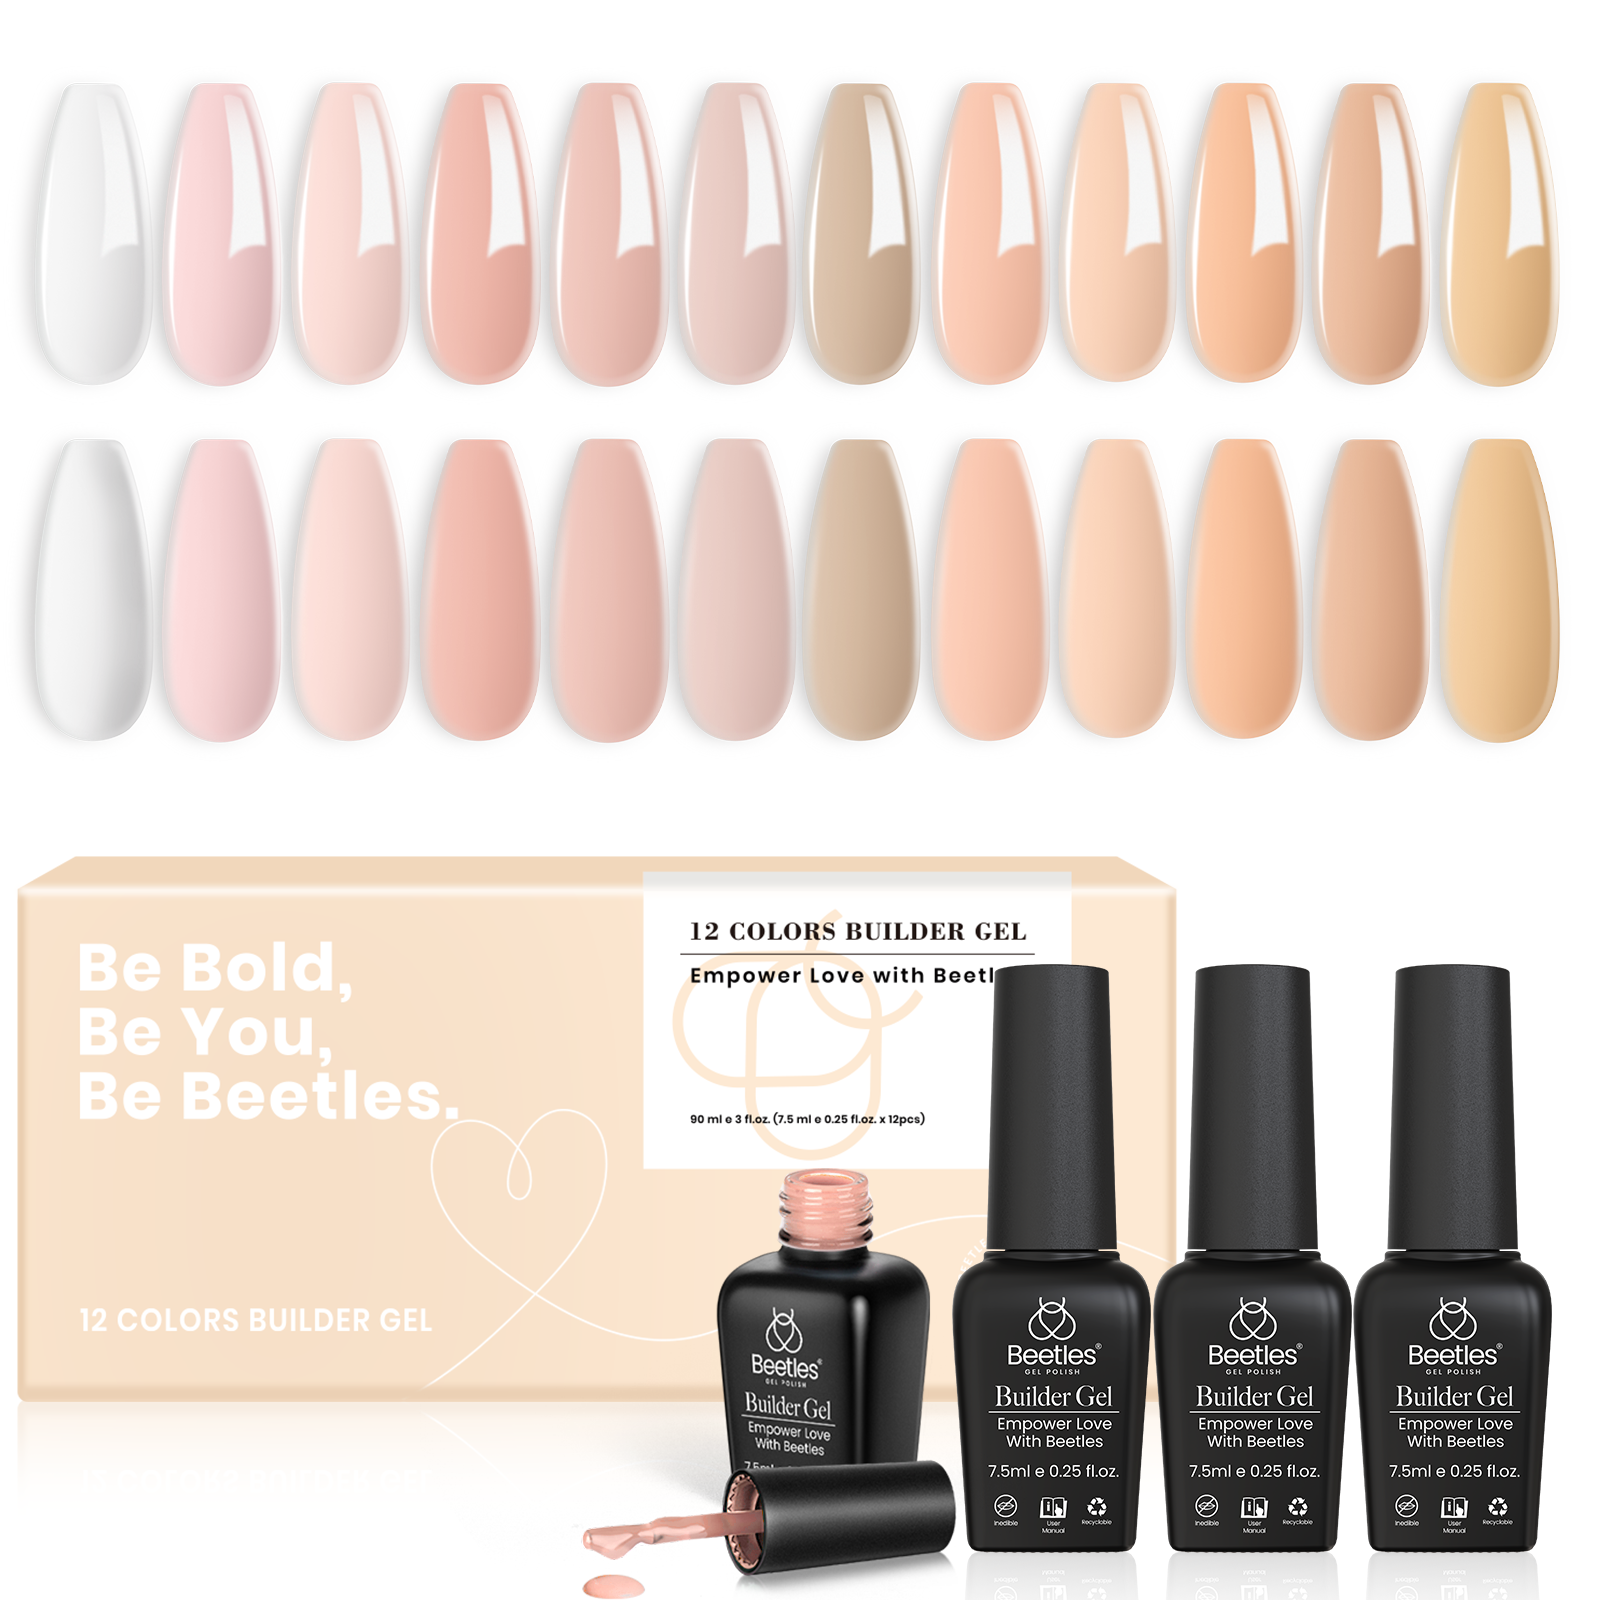 Beetles 5-in-1 Builder Gel Nails: 12 Colors Set for Strength and Beauty